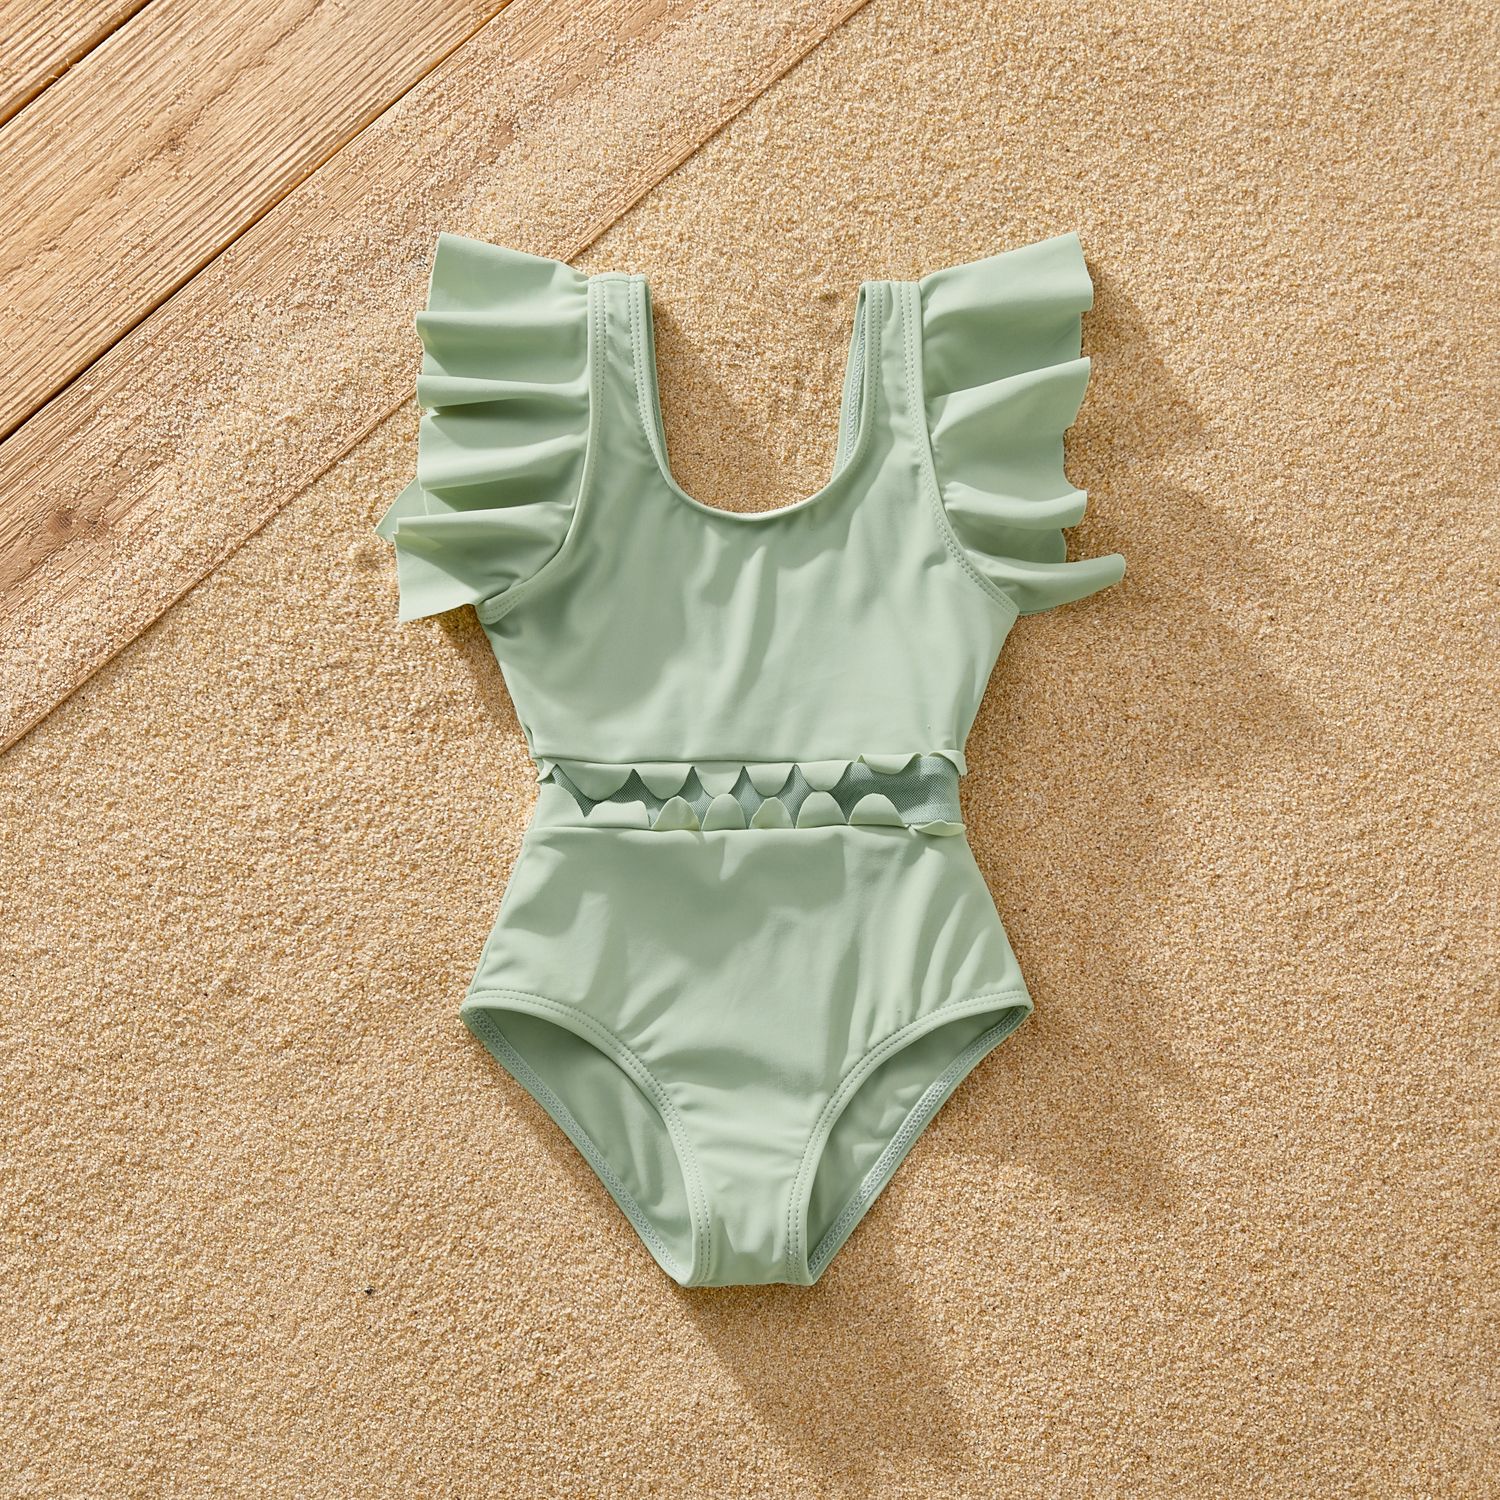 Family Matching Scallop Trim Green One-piece Swimsuit or Letter Print Swim Trunks Shorts